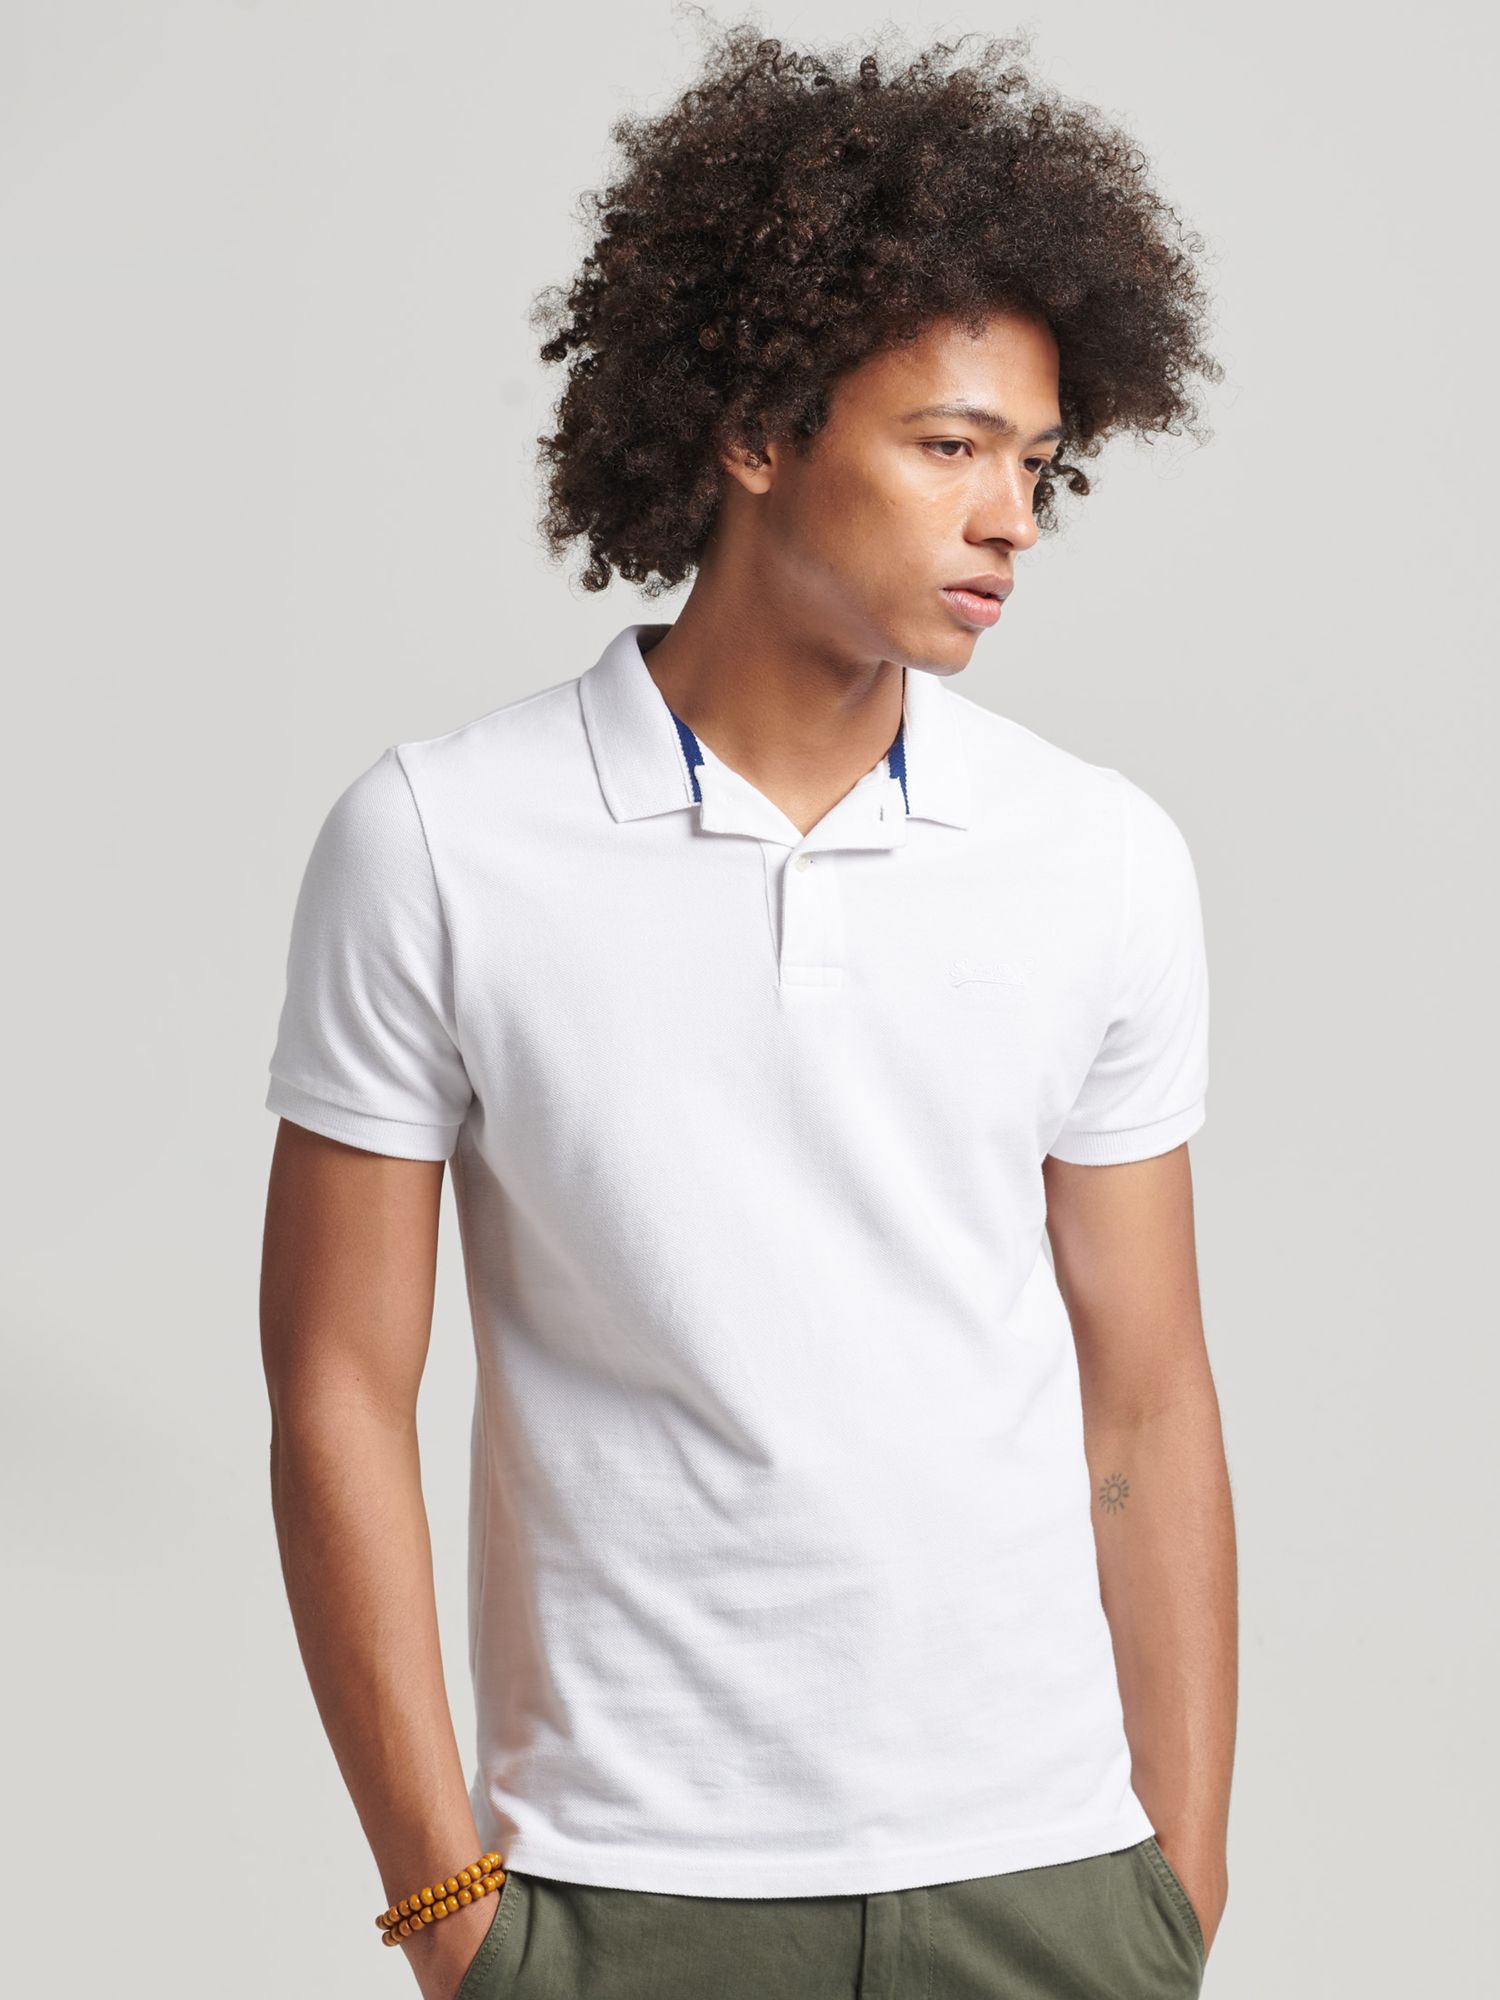 Superdry Classic Pique Polo Shirt, Lewis John at Partners & Optic